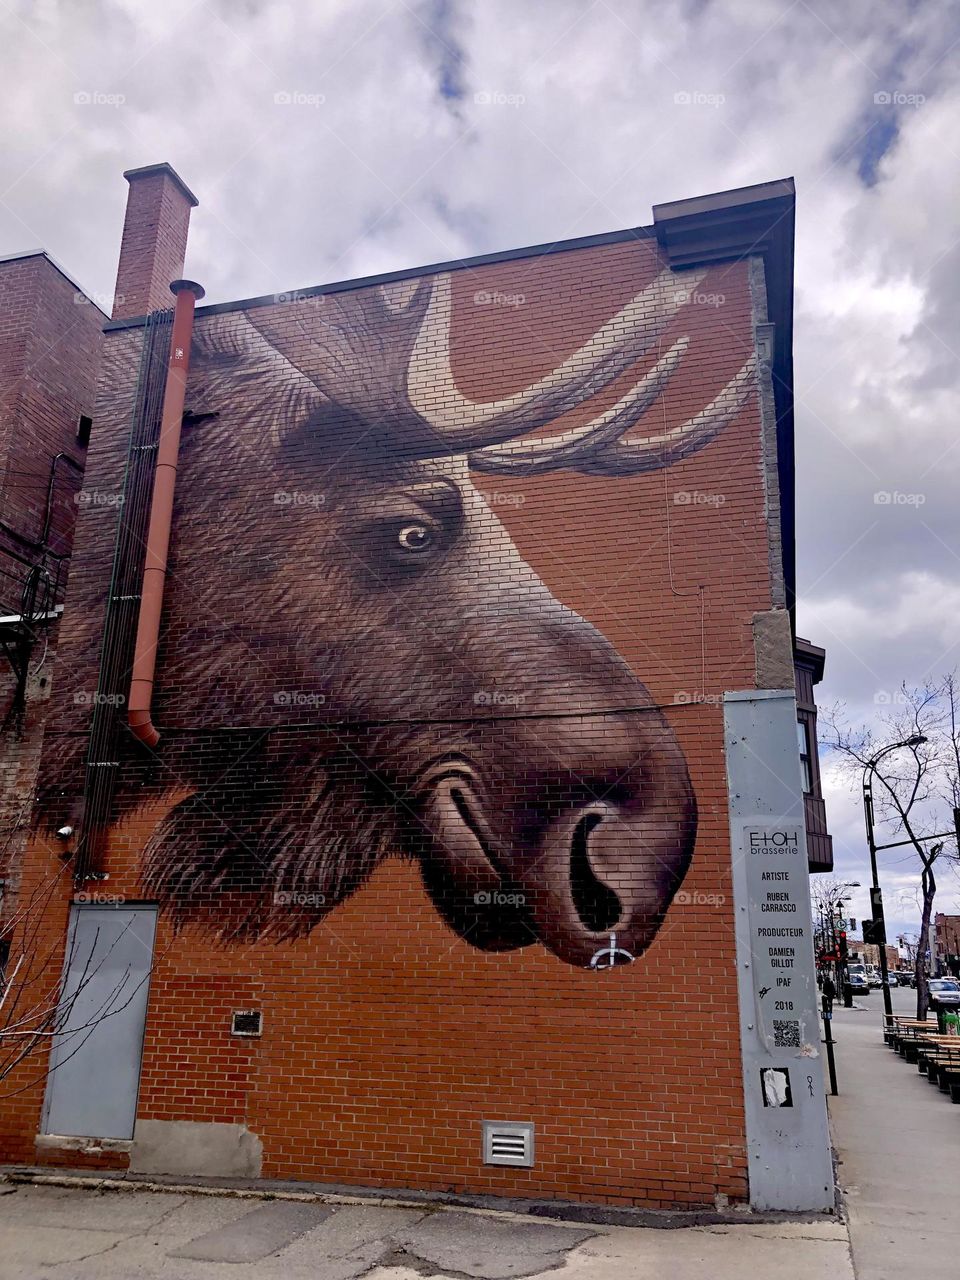 A mural of a moose on Jarry Est near the corner of boulevard Saint-Denis in Montreal.